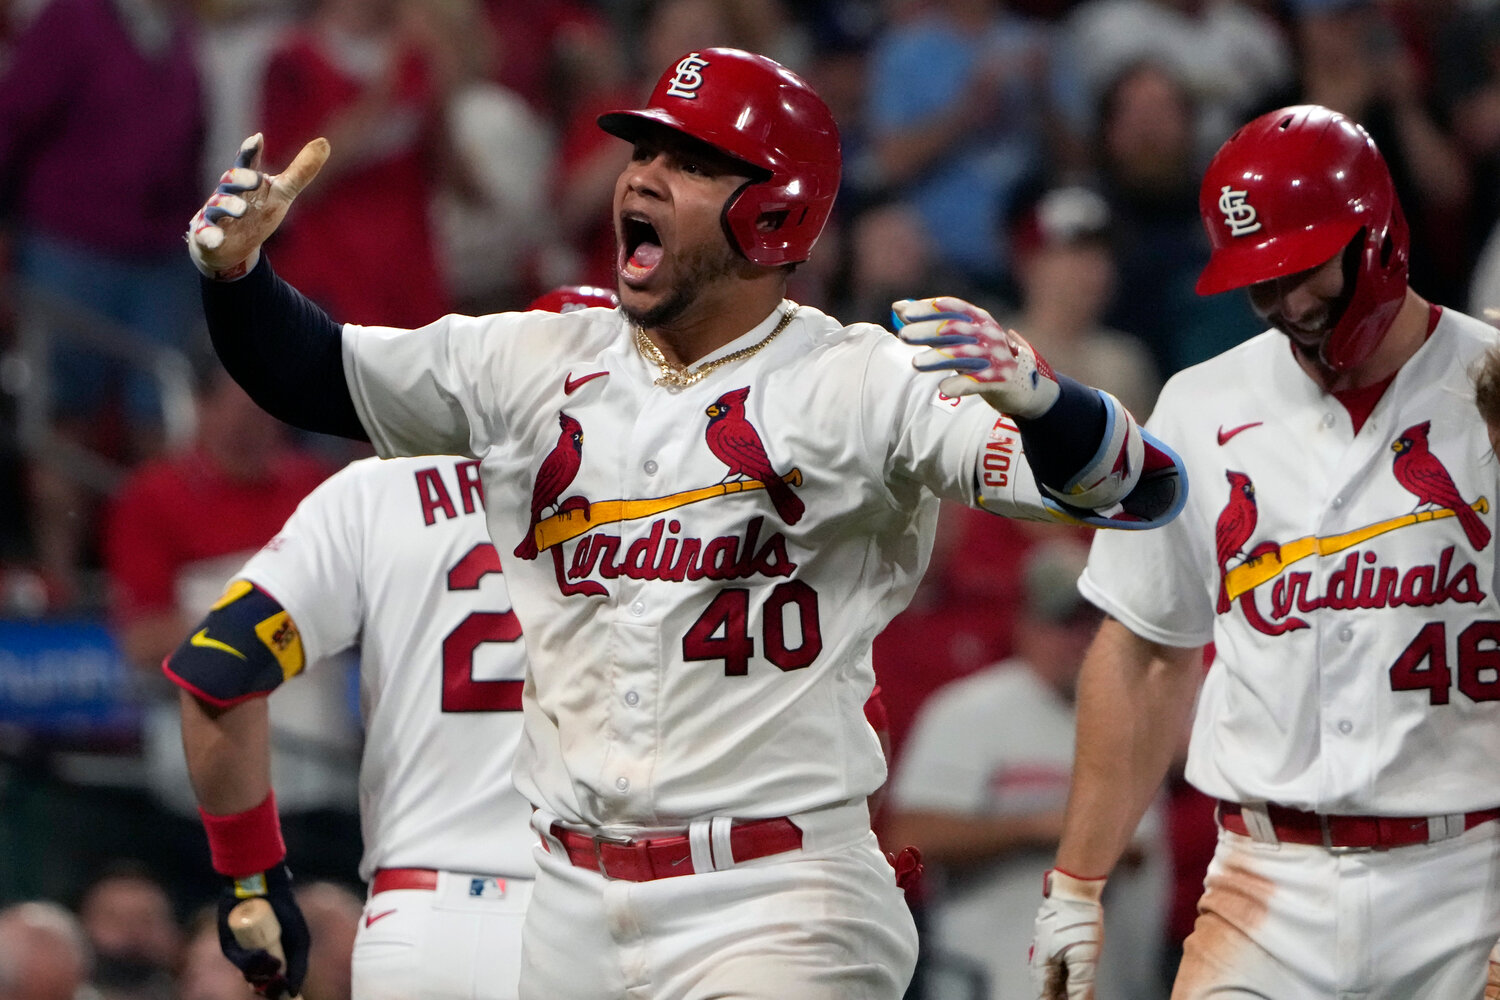 St. Louis Cardinals' Willson Contreras (40) celebrates after hitting a three-run home run during the eighth inning of their game against the Los Angeles Dodgers on Thursday night in St. Louis. (AP Photo/Jeff Roberson)